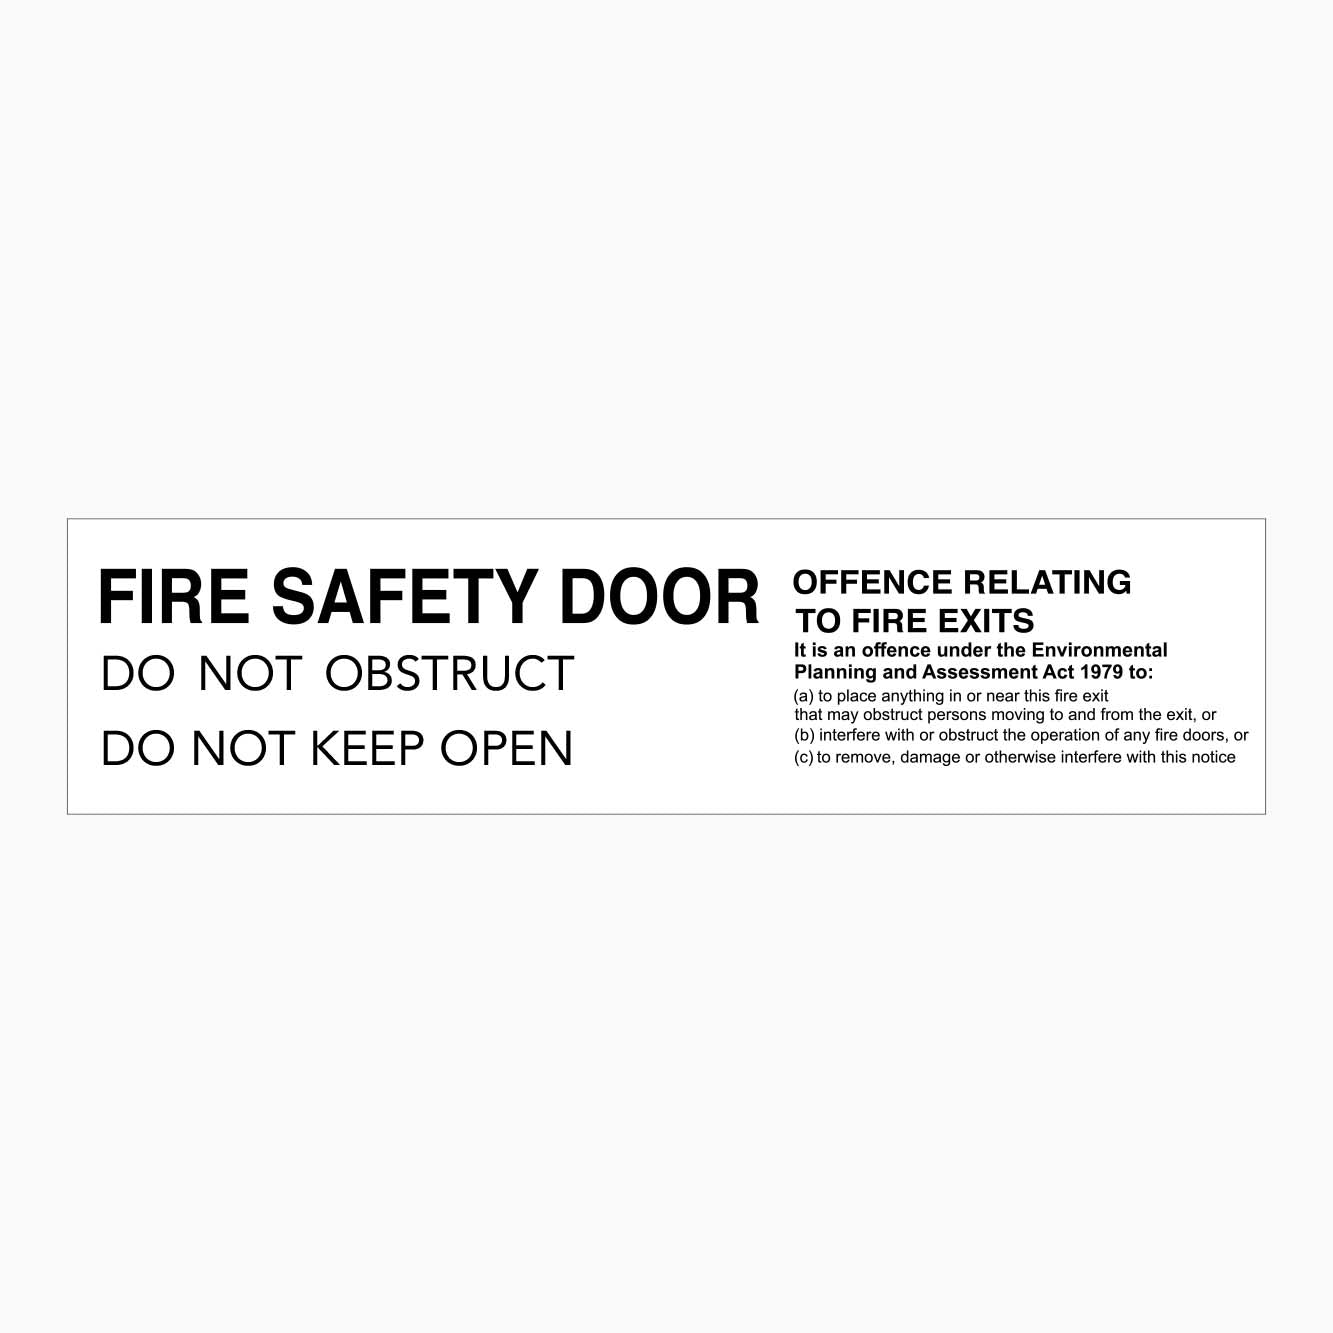 FIRE SAFETY DOOR SIGN AND OFFENCE RELATING TO FIRE EXITS SIGN